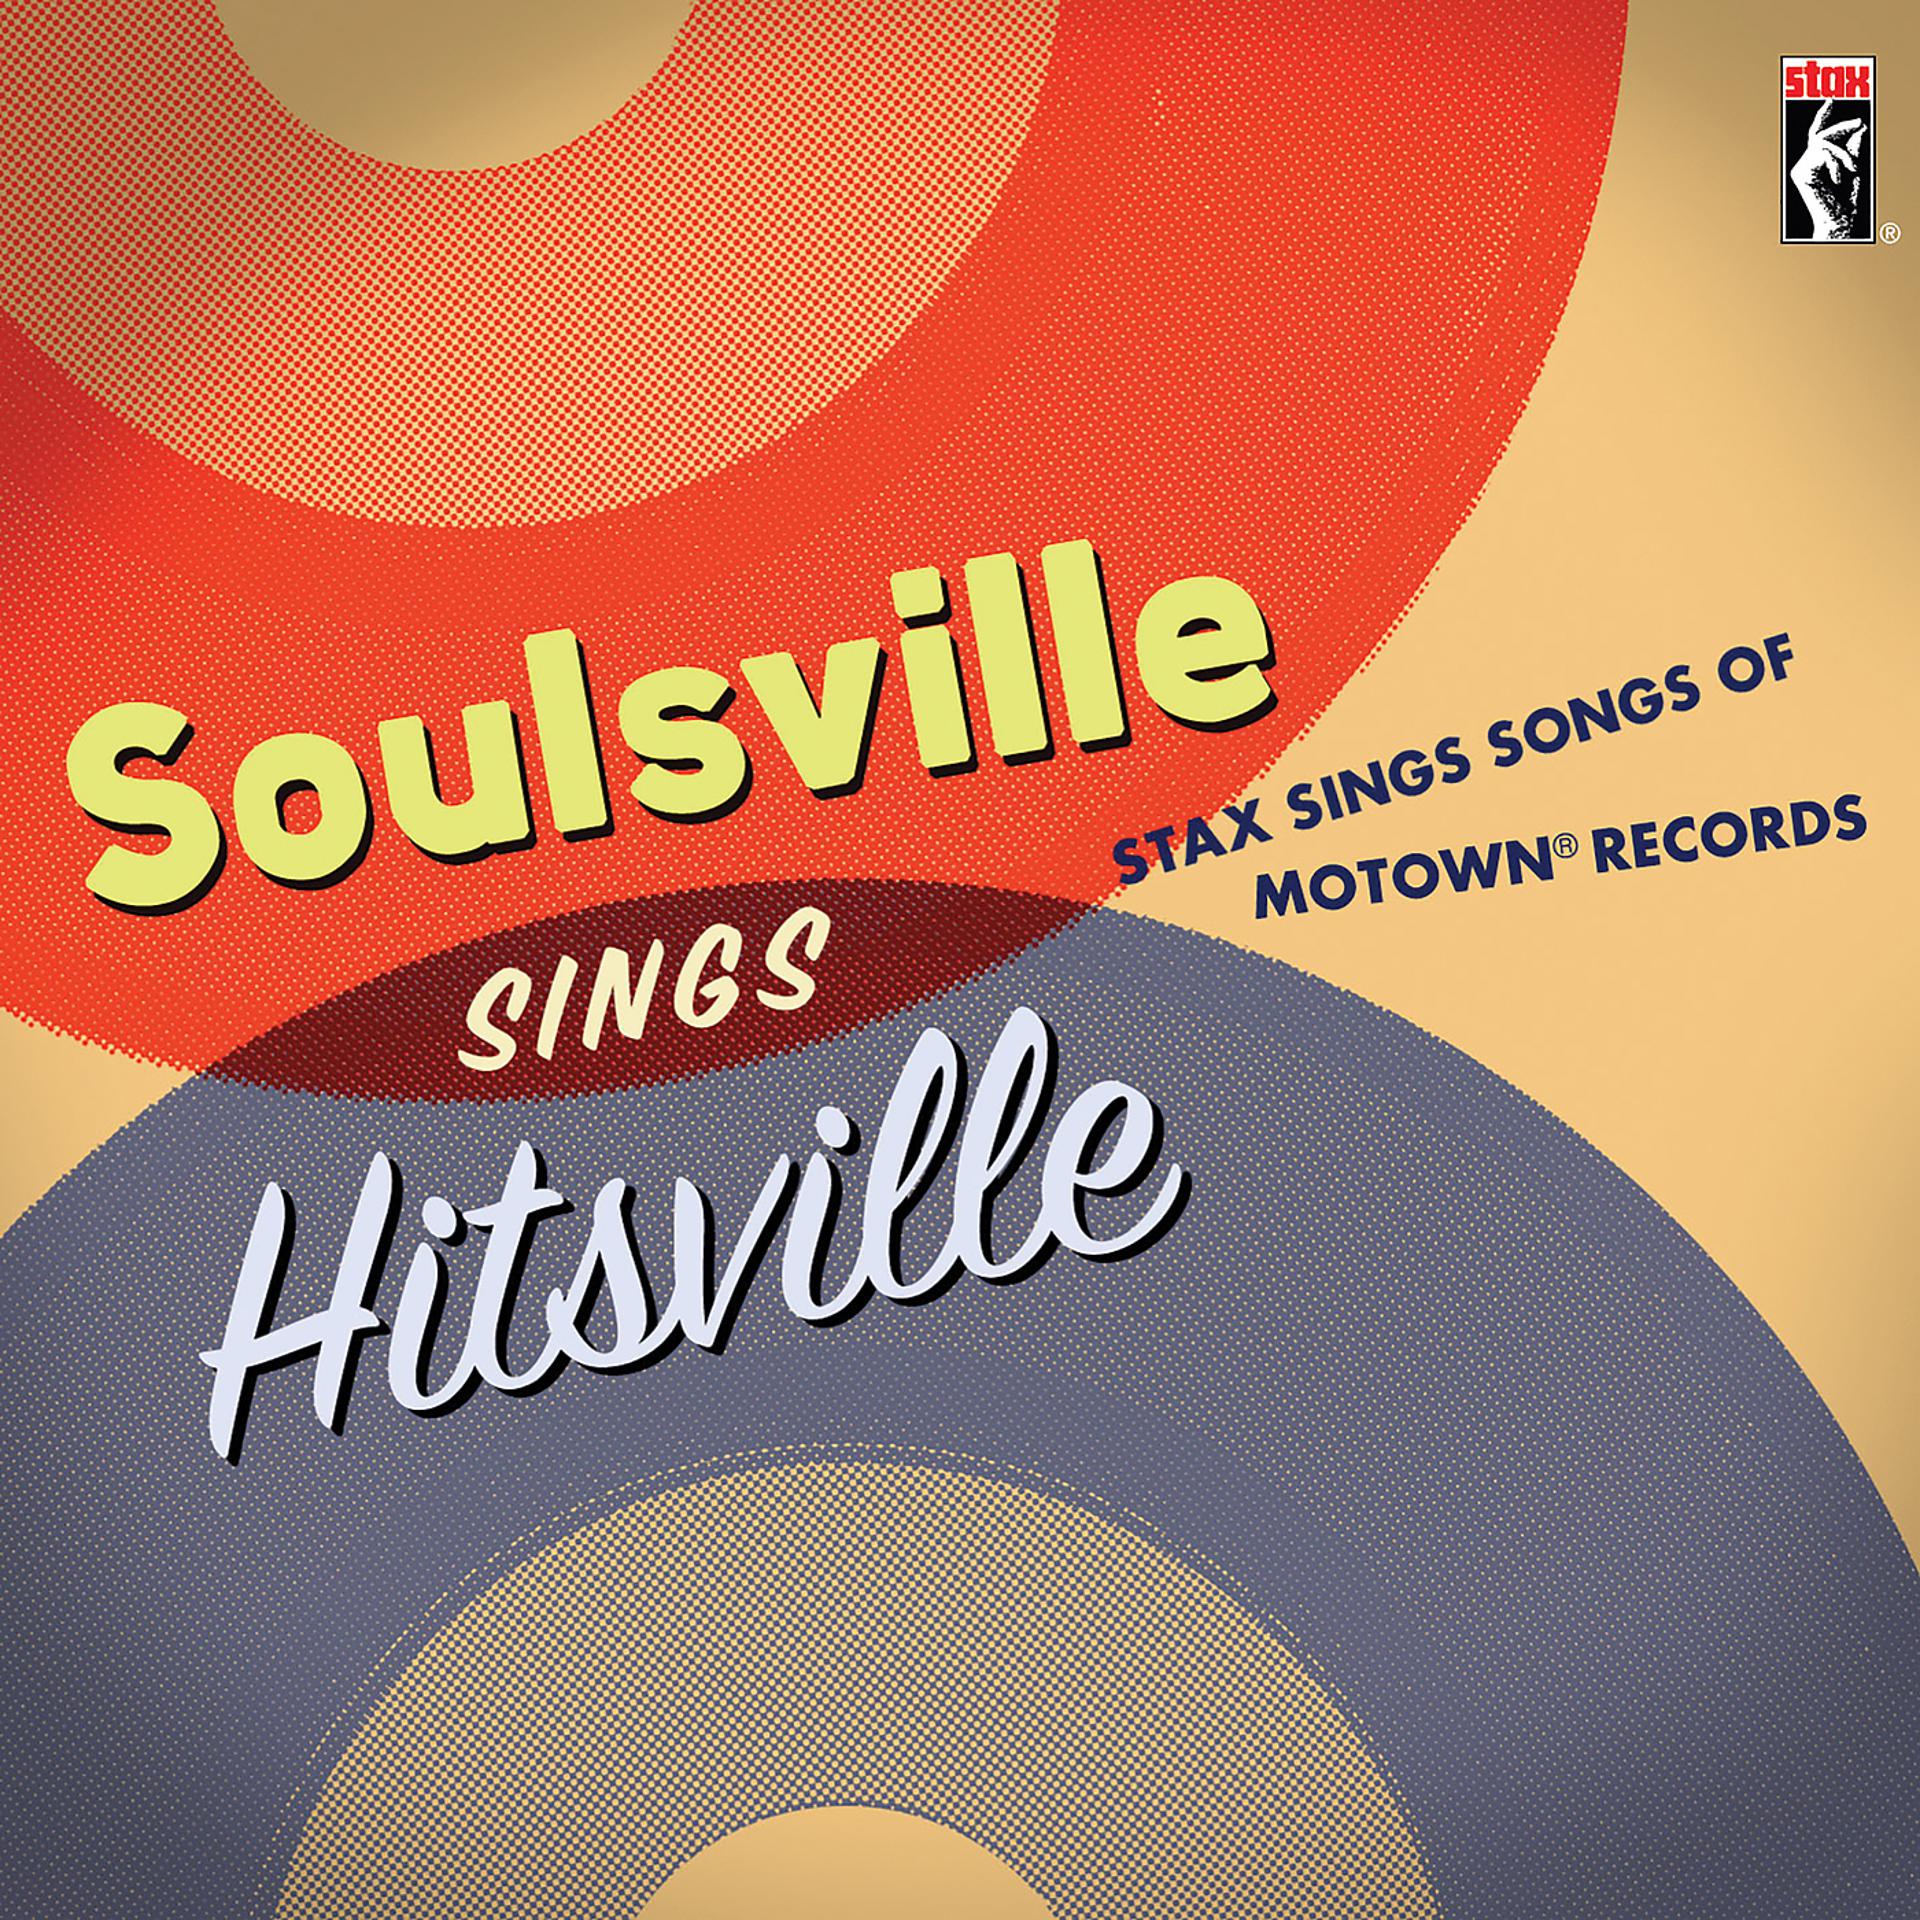 Постер альбома Soulsville Sings Hitsville: Stax Sings Songs Of Motown® Records